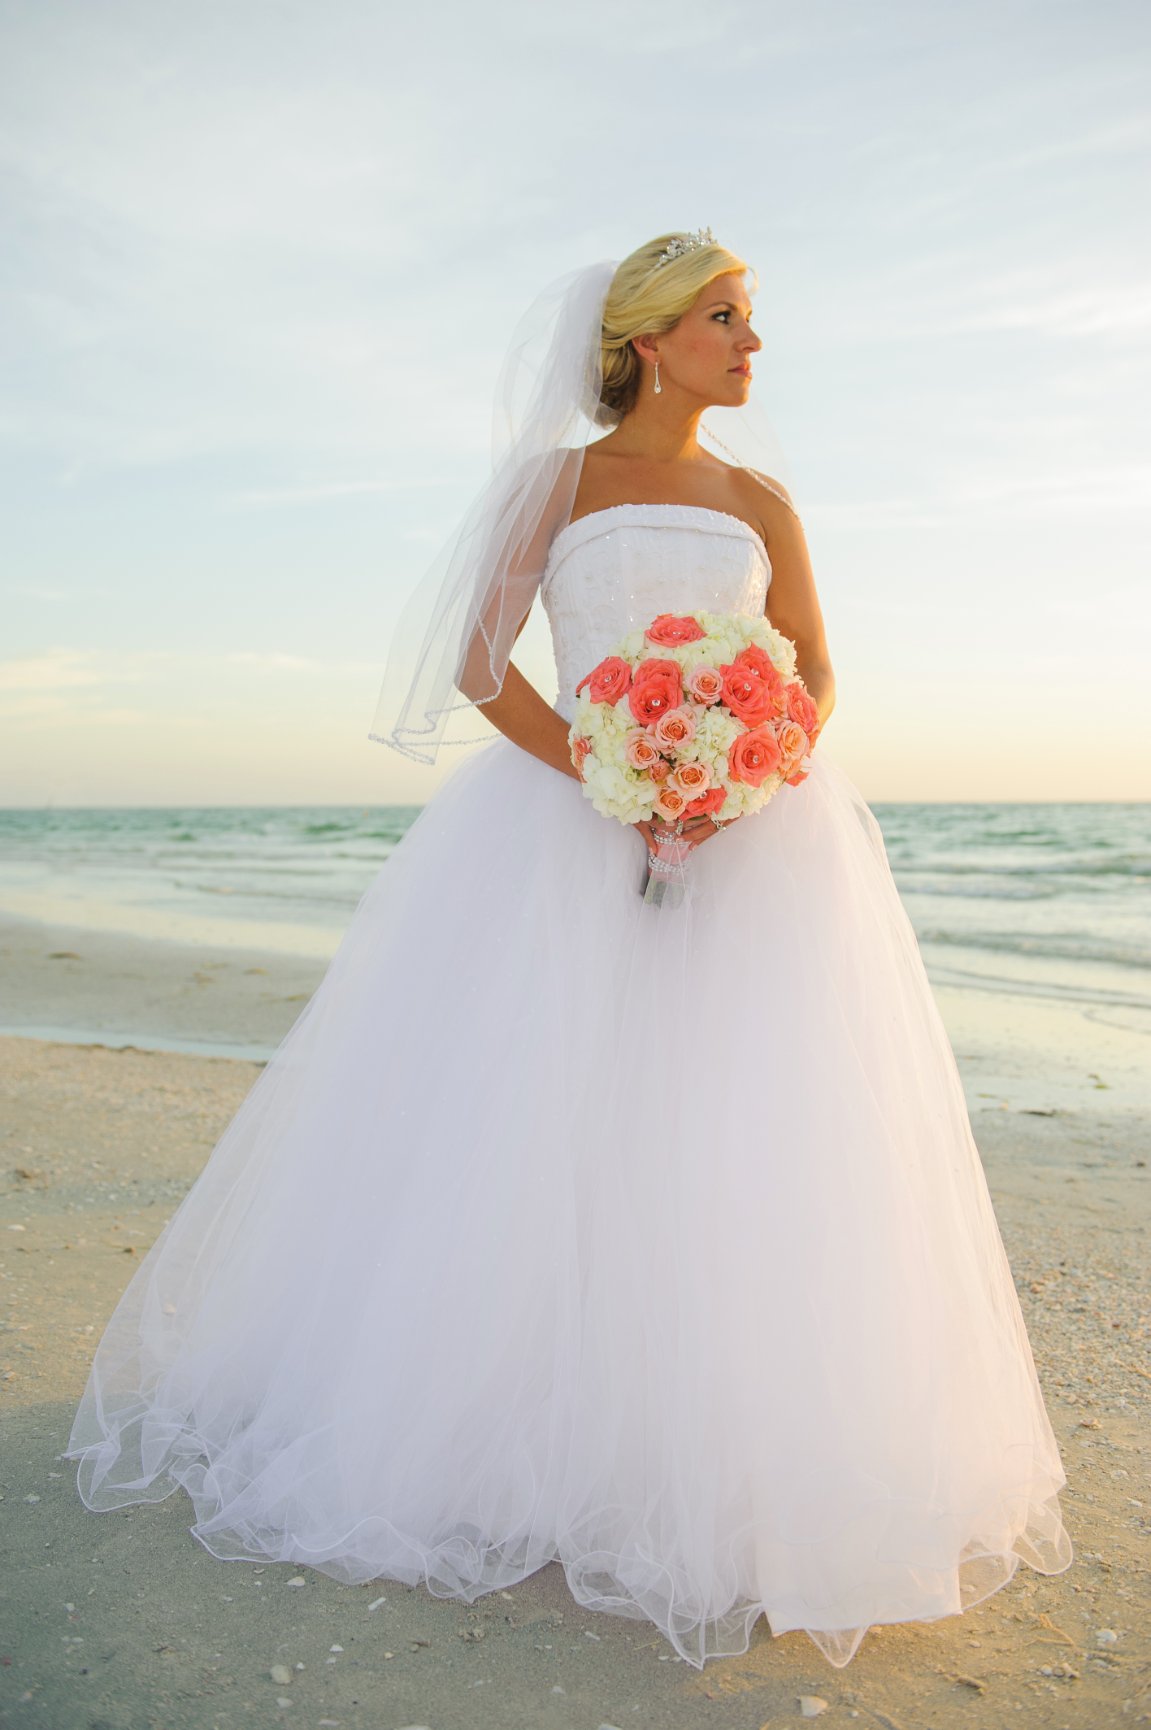 Simple Weddings What To Wear For Your Beach Wedding